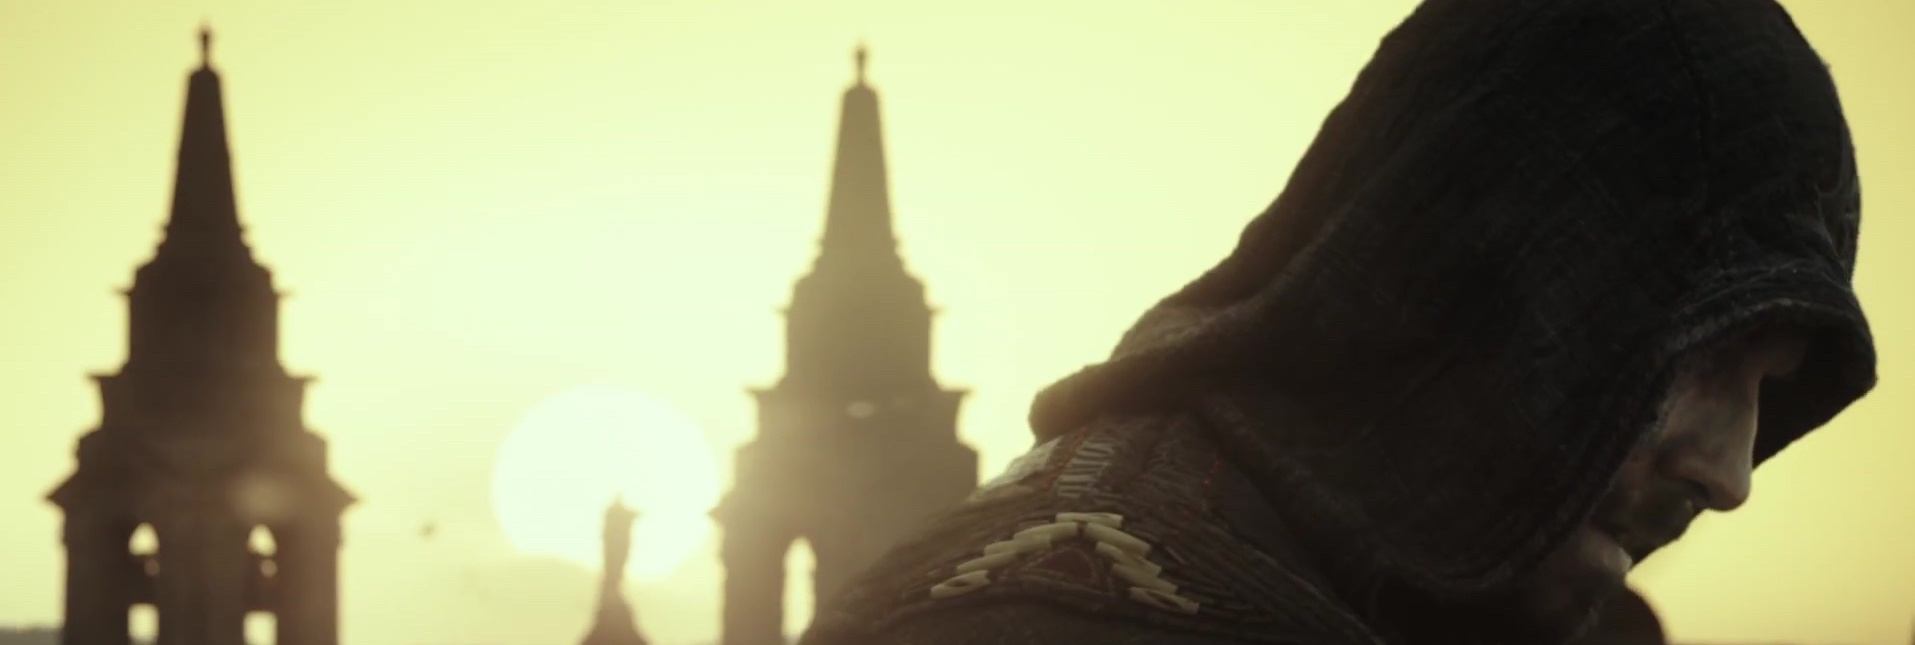 Assassins Creed, video game into movie